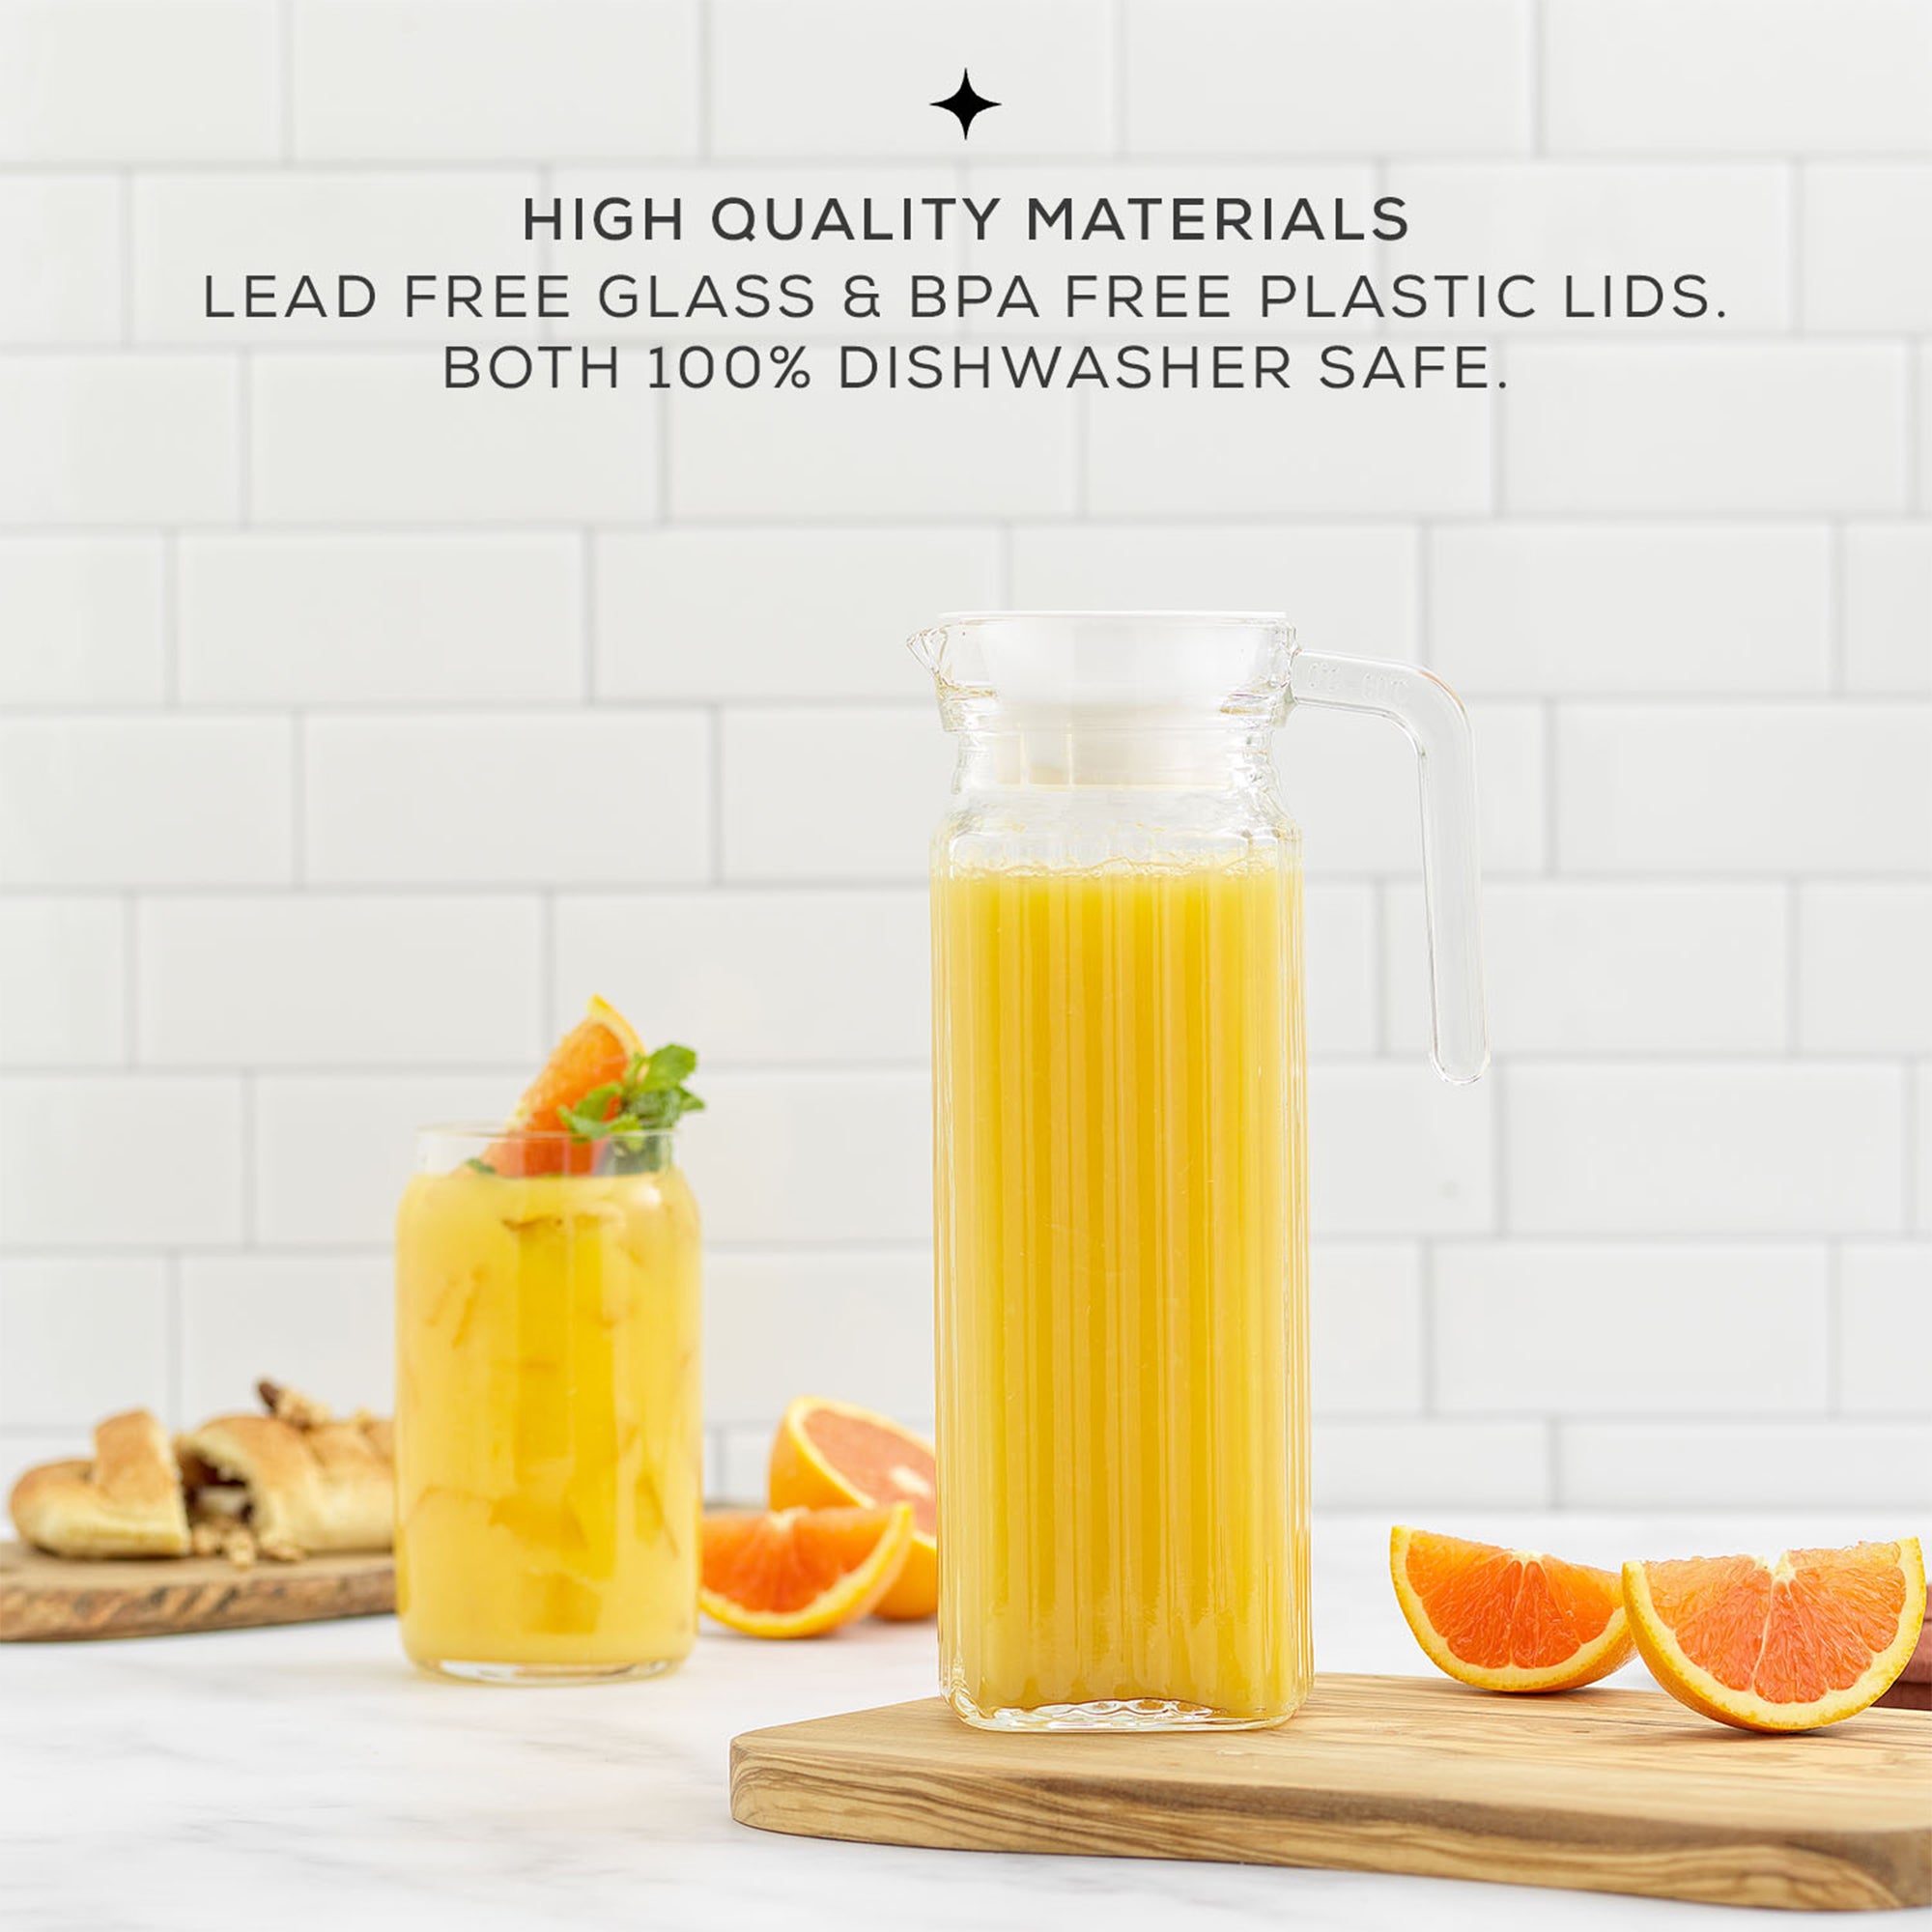 A glass pitcher filled with orange juice sits on a table next to a pile of oranges. The pitcher has a clear glass body, a white lid, and a handle for easy pouring. Text on the image reads "HIGH QUALITY MATERIALS LEAD FREE GLASS & BPA FREE PLASTIC LIDS. BOTH 100% DISHWASHER SAFE." This is a JoyJolt Beverage Serveware Glass Pitcher, 40oz.